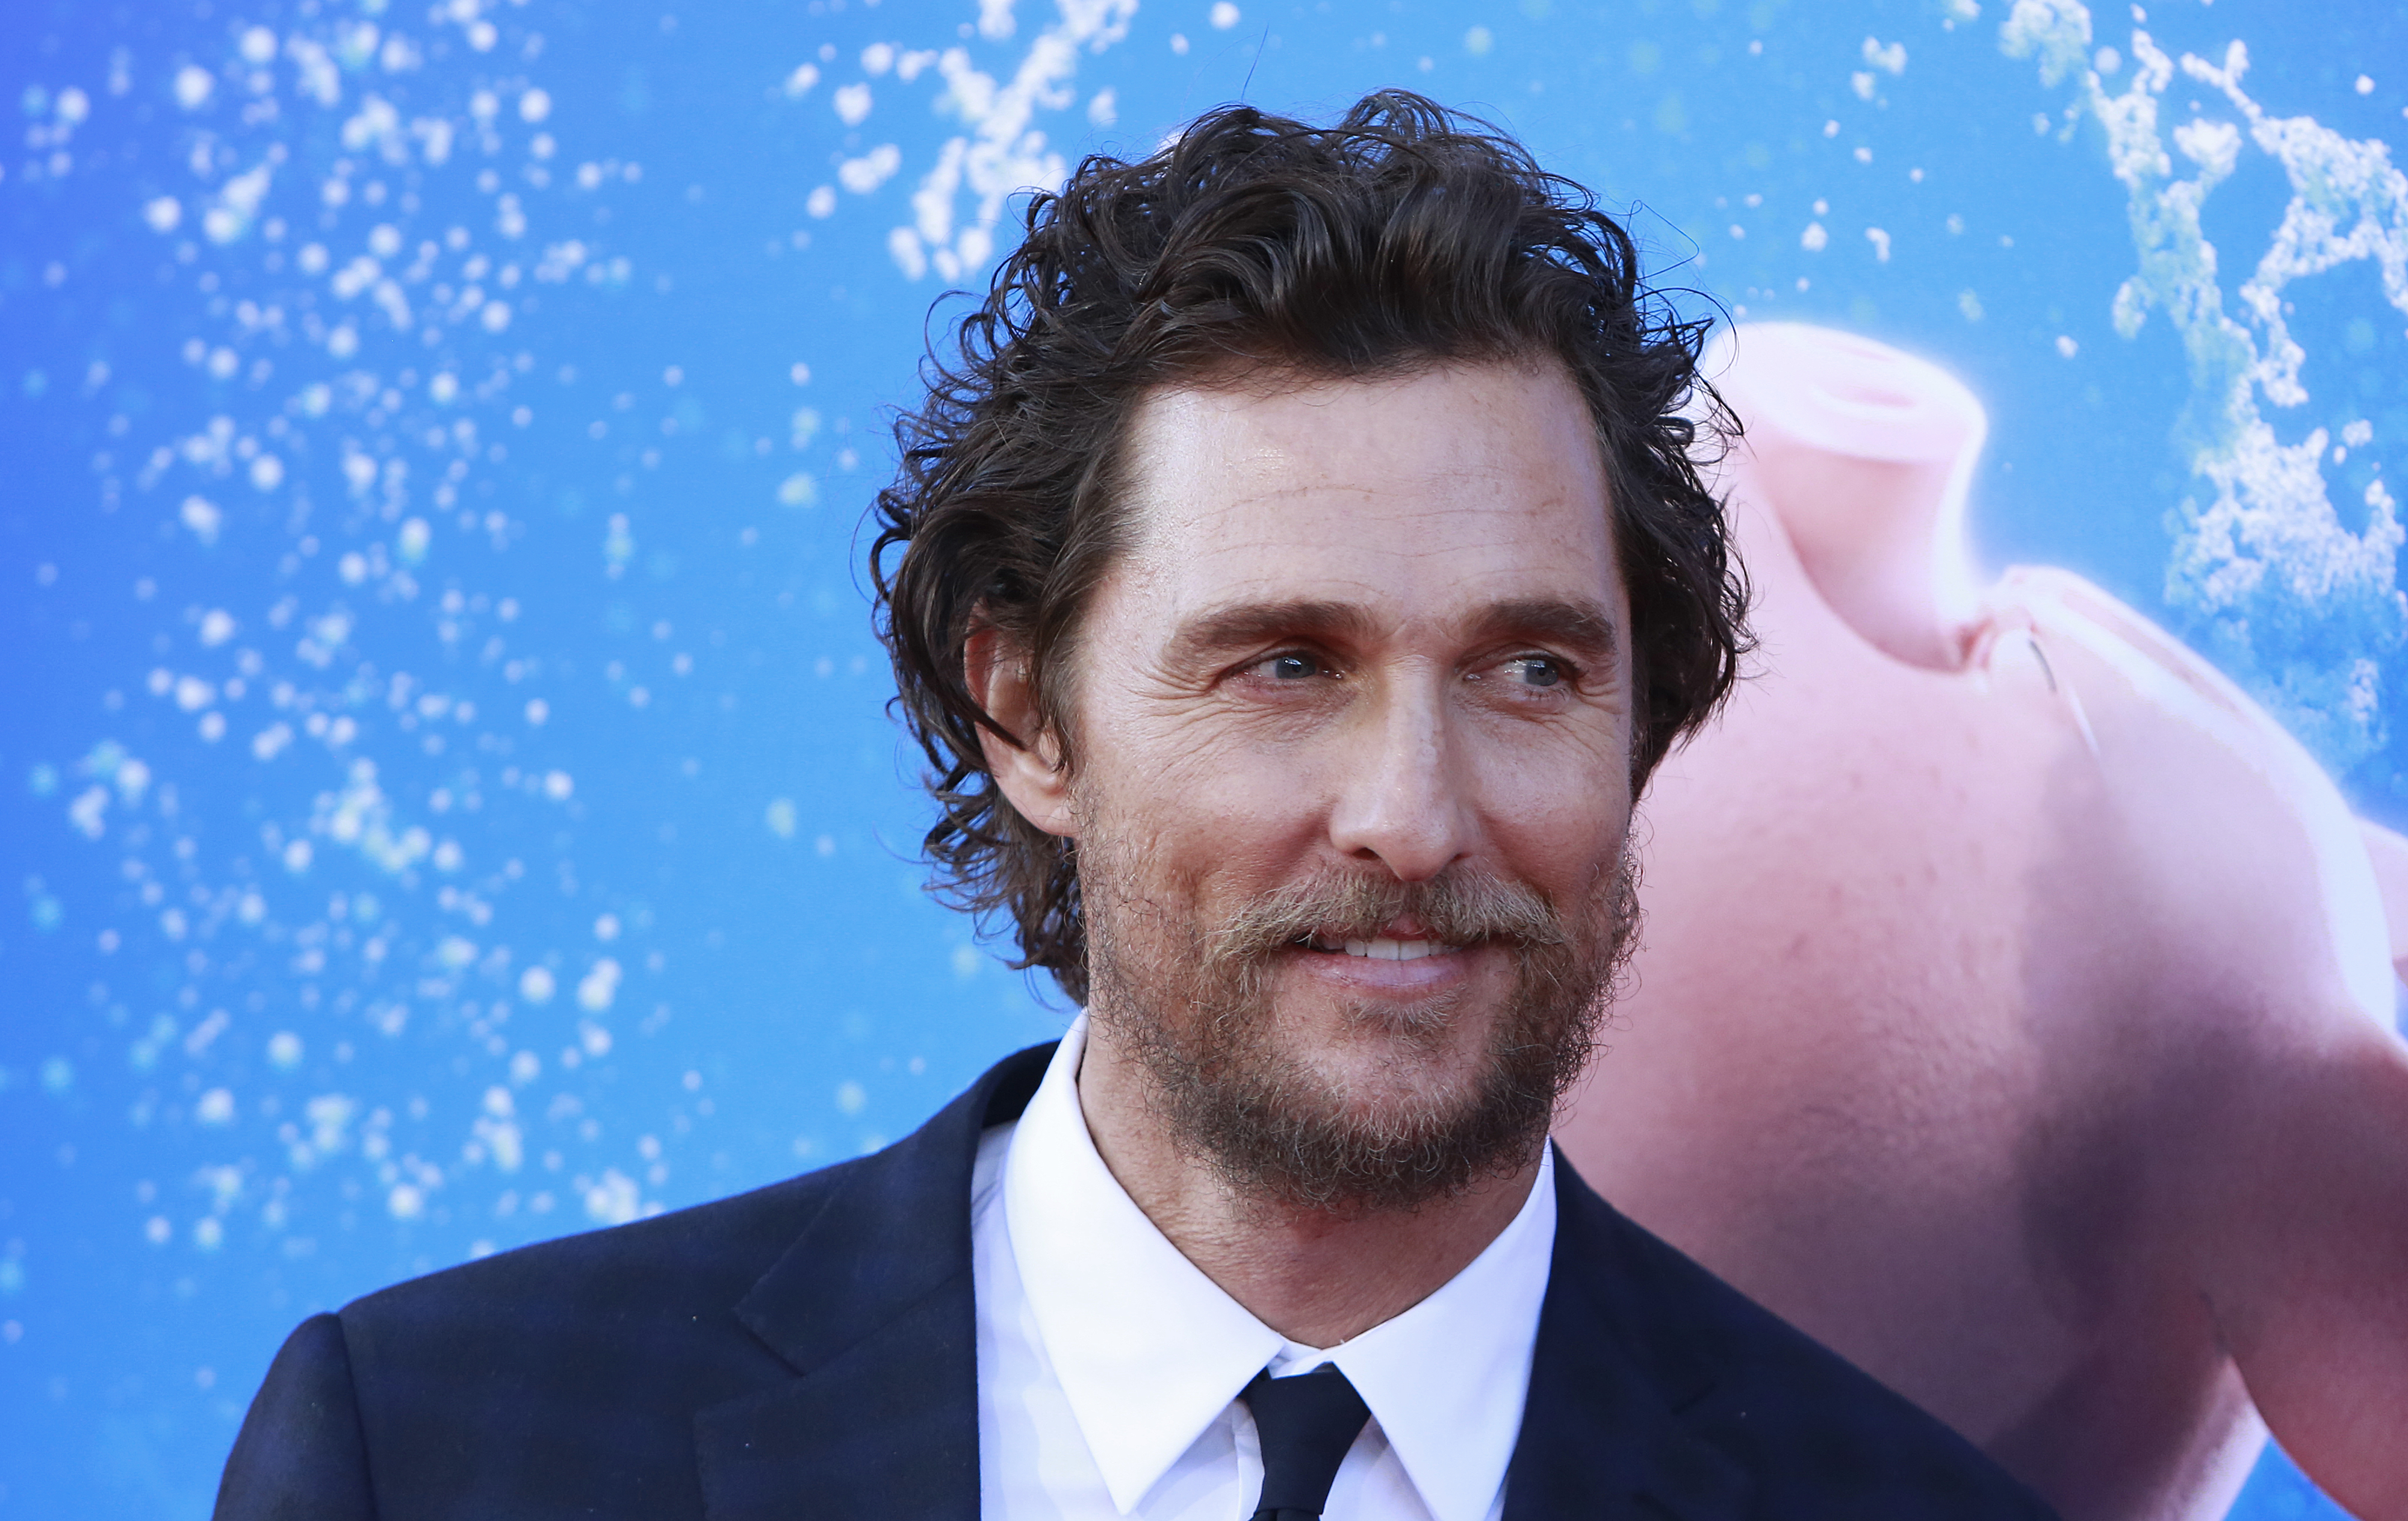 Matthew McConaughey in a suit at a movie premiere with a graphic backdrop